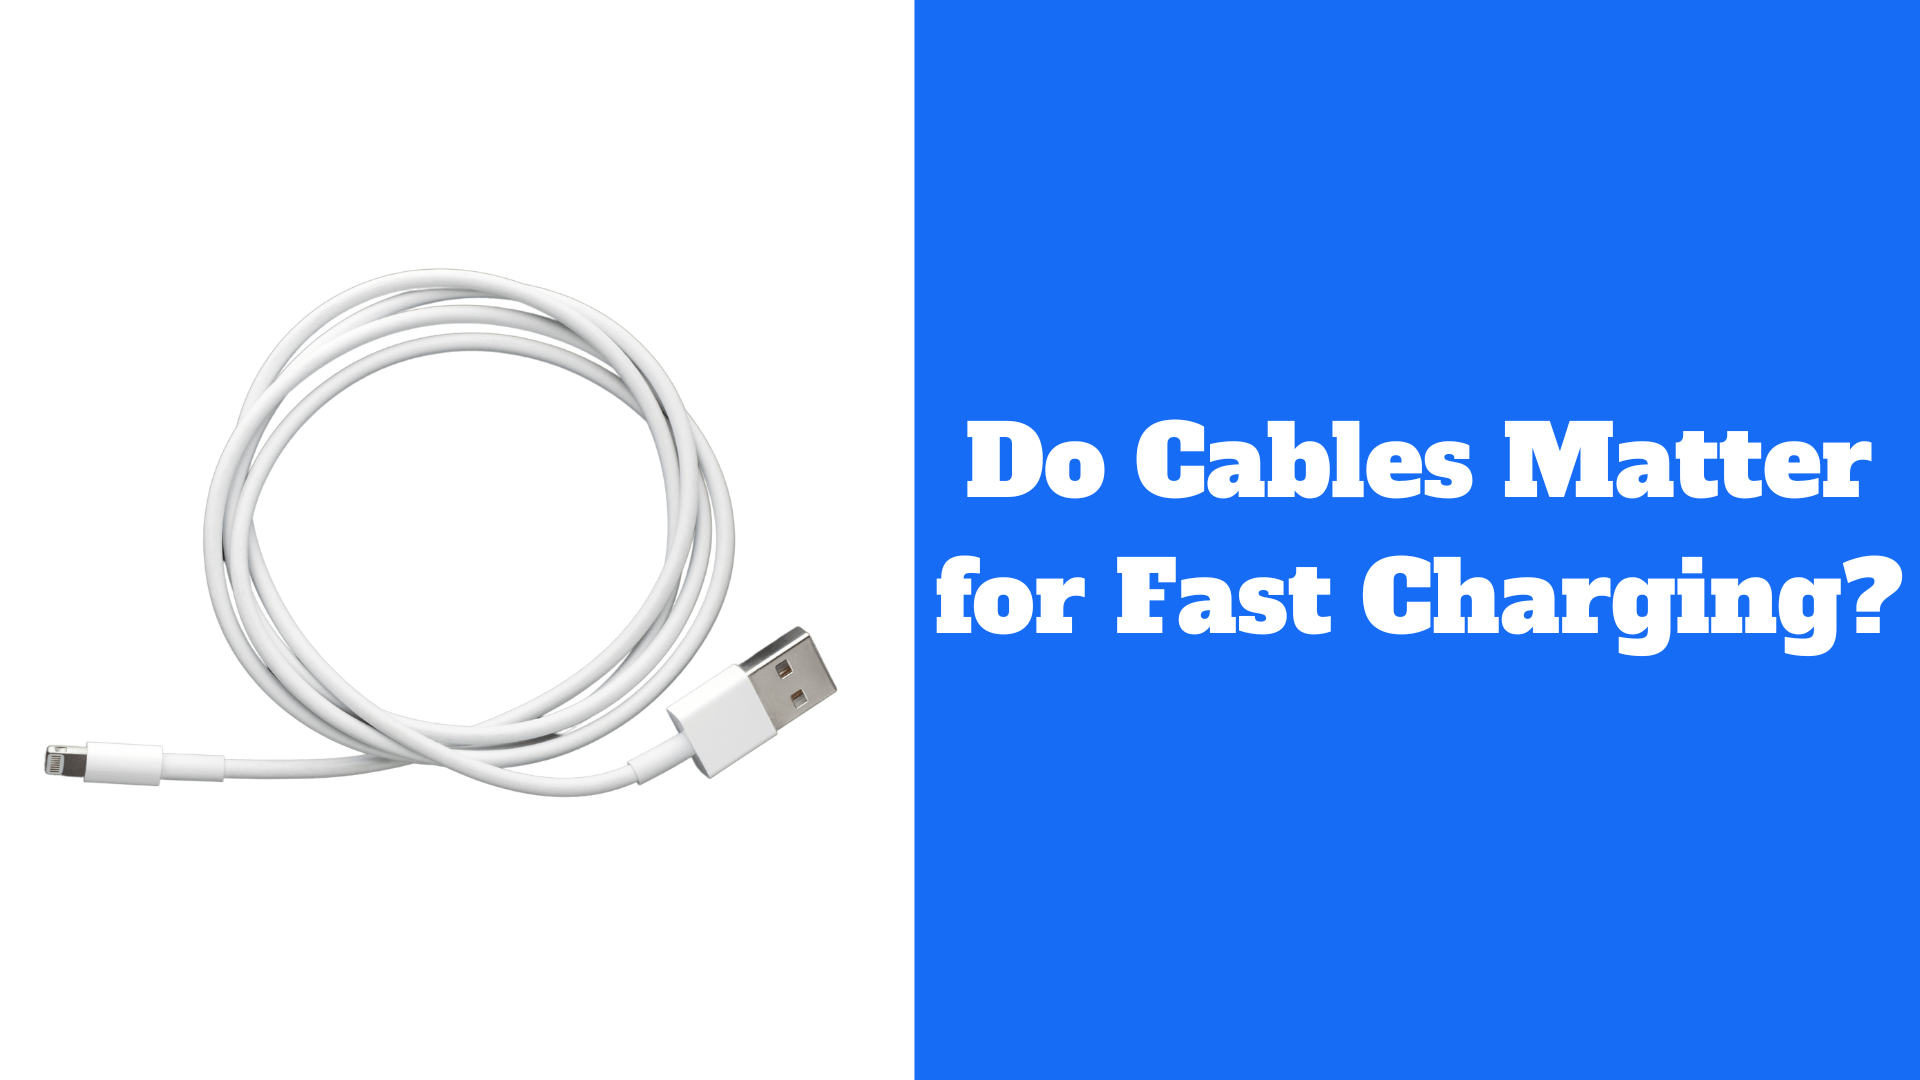 Do Cables Matter for Fast Charging